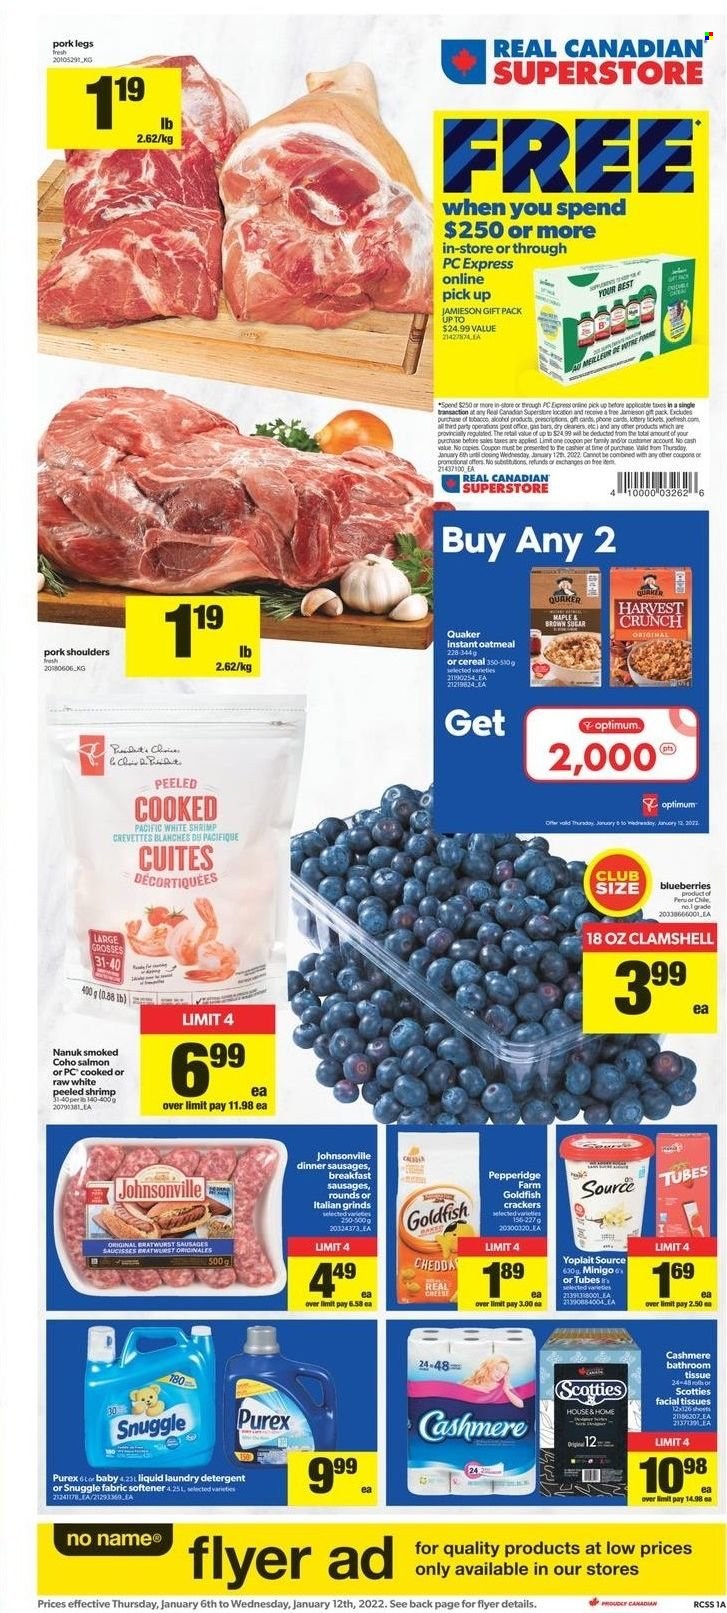 Real Canadian Superstore Flyer - January 06, 2022 - January 12, 2022 - Sales products - blueberries, salmon, No Name, Quaker, Johnsonville, sausage, Yoplait, crackers, Goldfish, oatmeal, alcohol, bath tissue, Snuggle, fabric softener, laundry detergent, Purex, facial tissues, Optimum, detergent. Page 1.